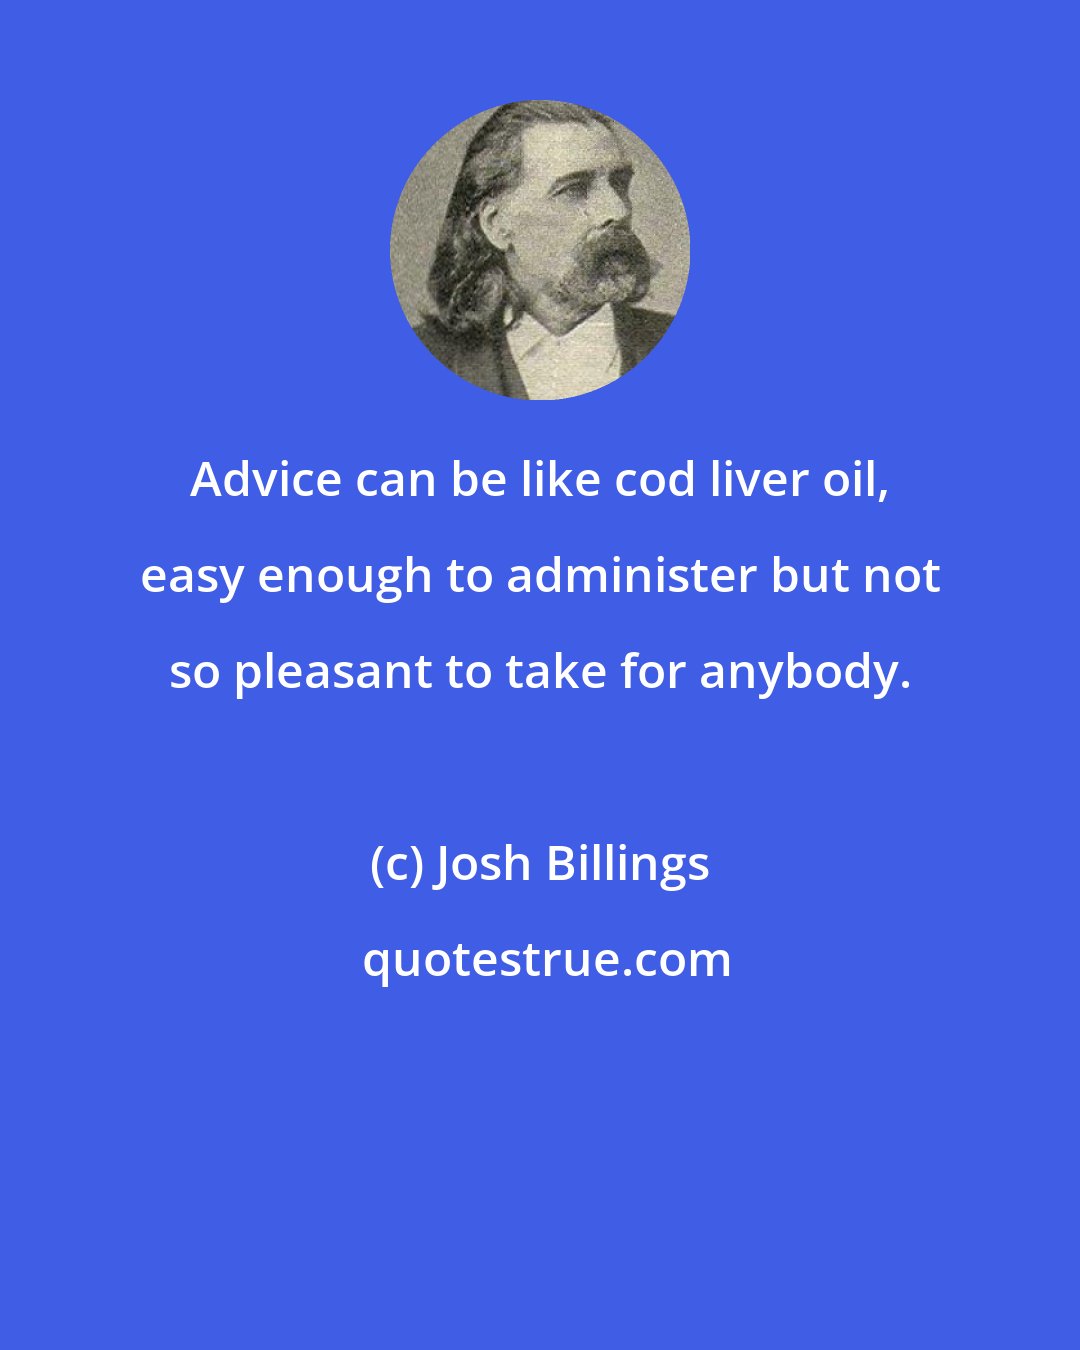 Josh Billings: Advice can be like cod liver oil, easy enough to administer but not so pleasant to take for anybody.